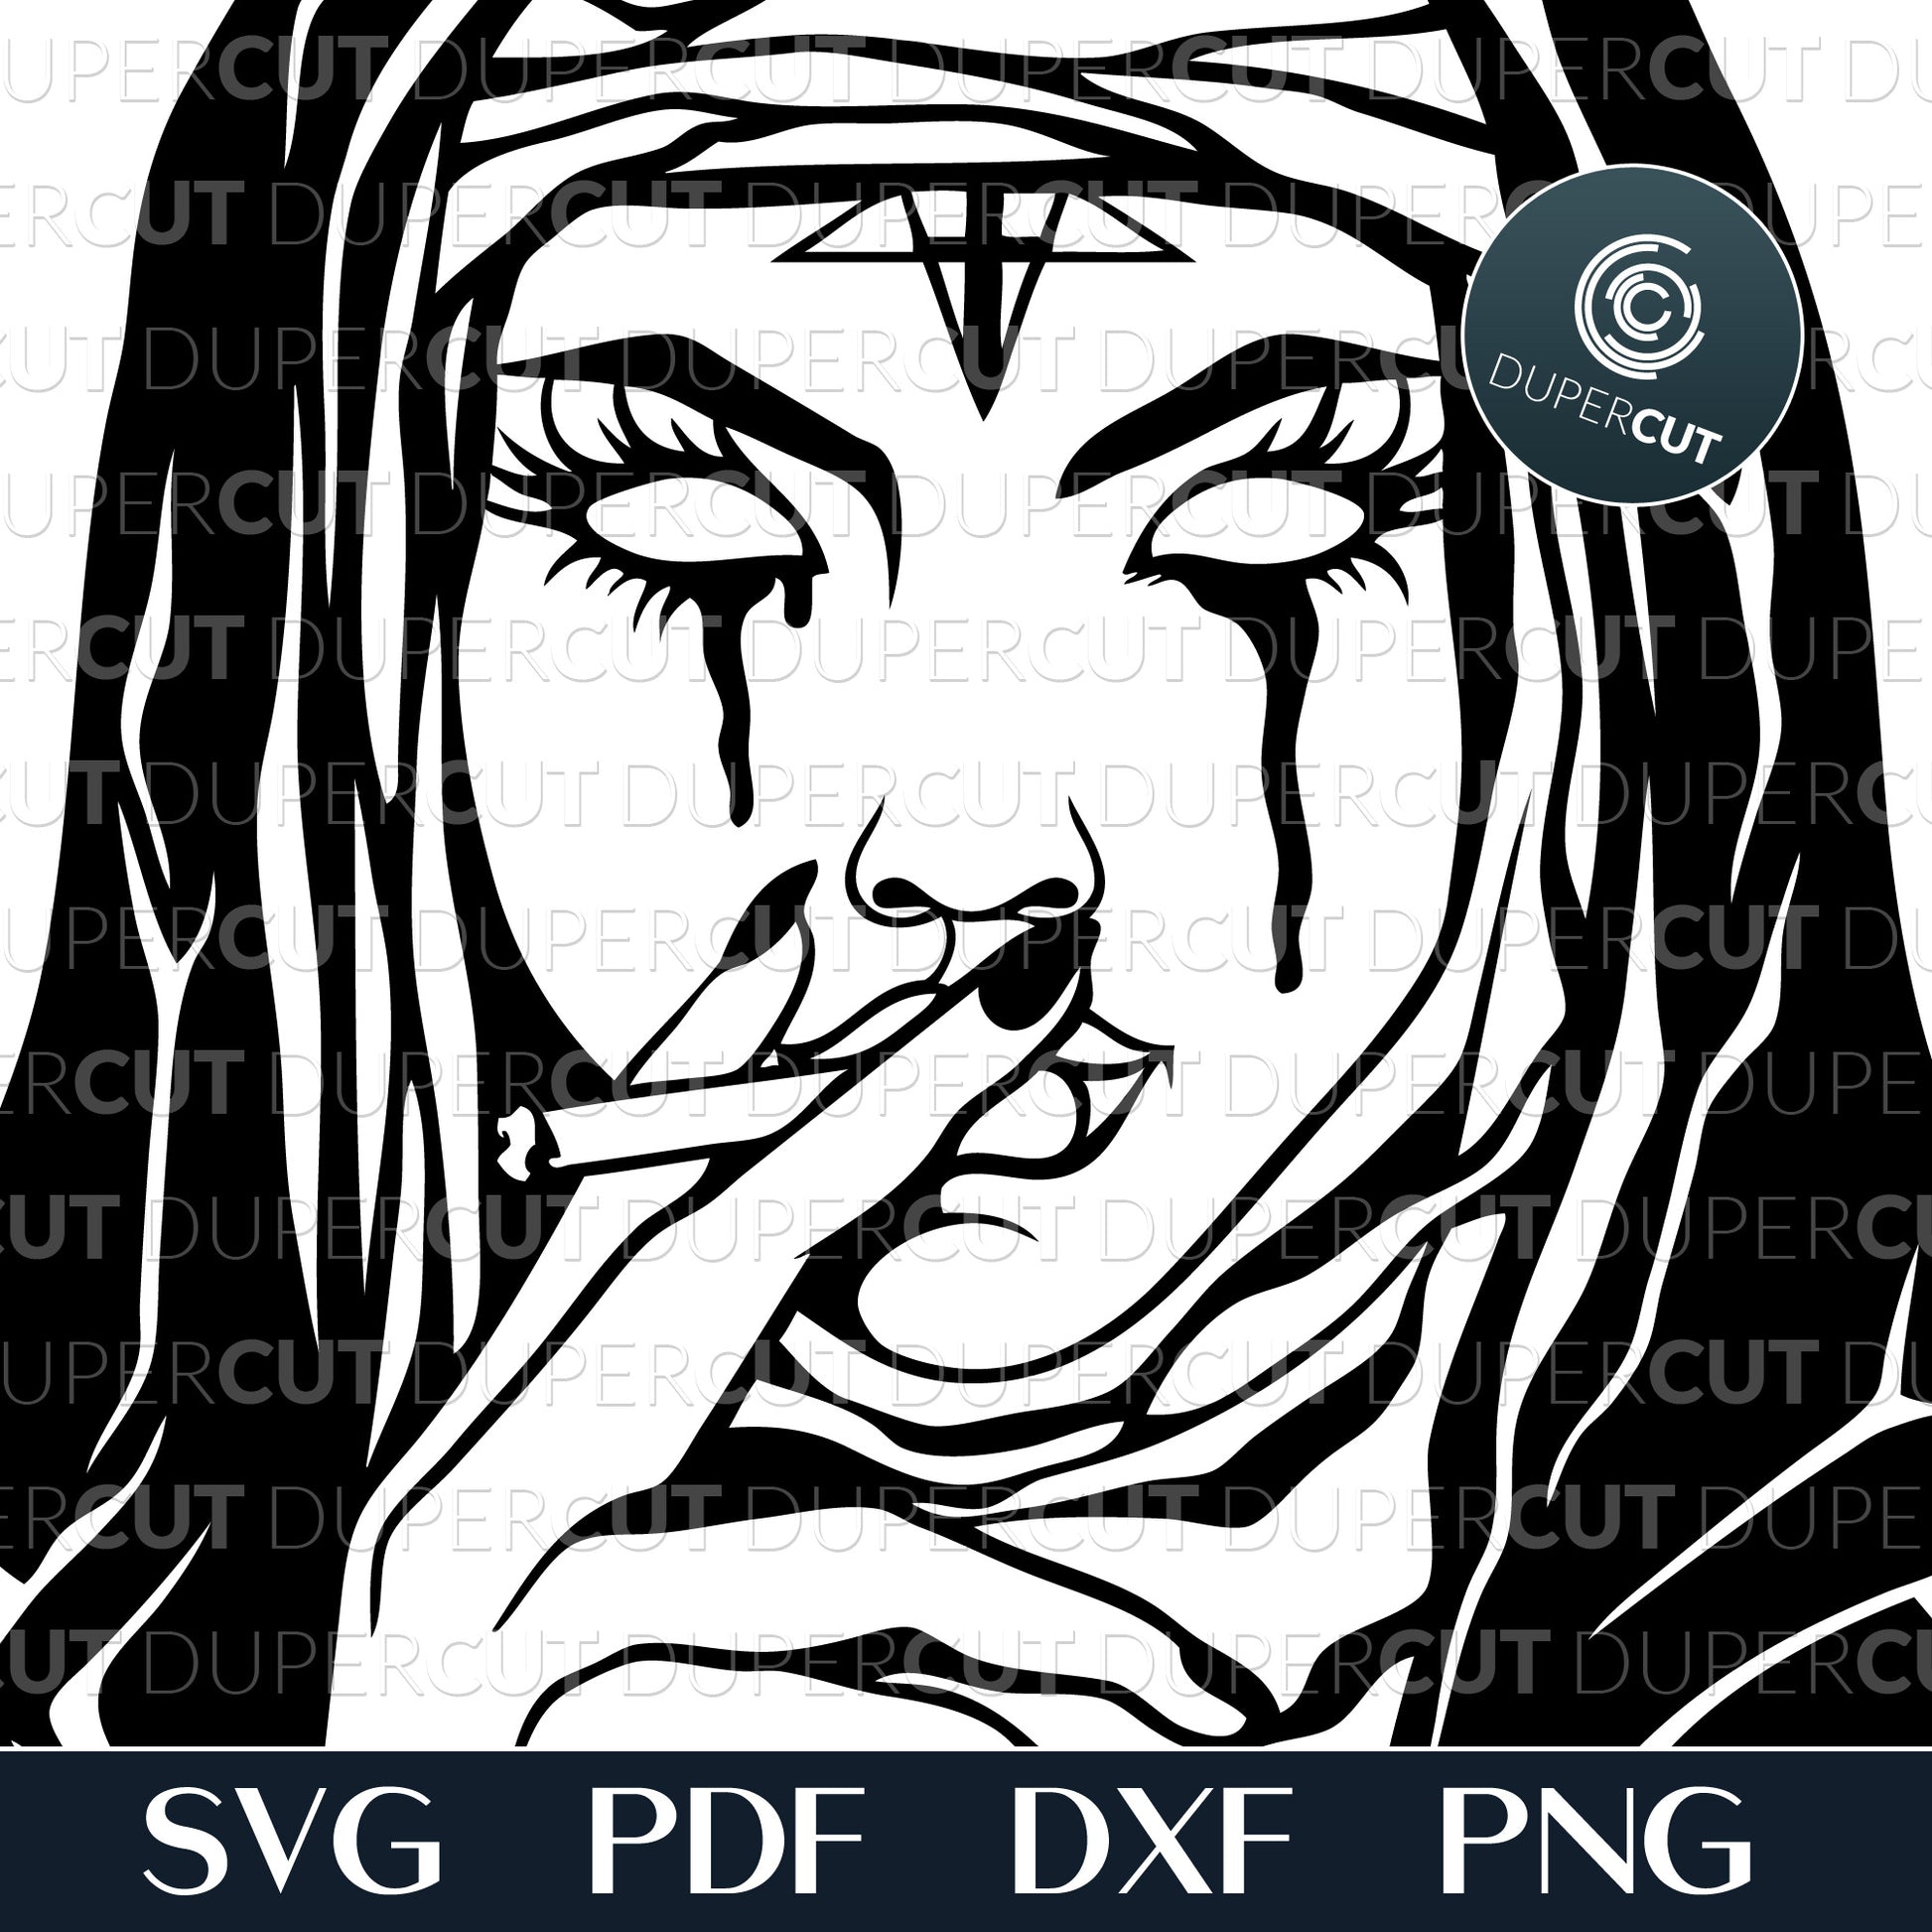 Smoking Nun, Black gothic design, grunge scary illustration, paper cutting template for Cricut, Silhouette Cameo, Glowforge